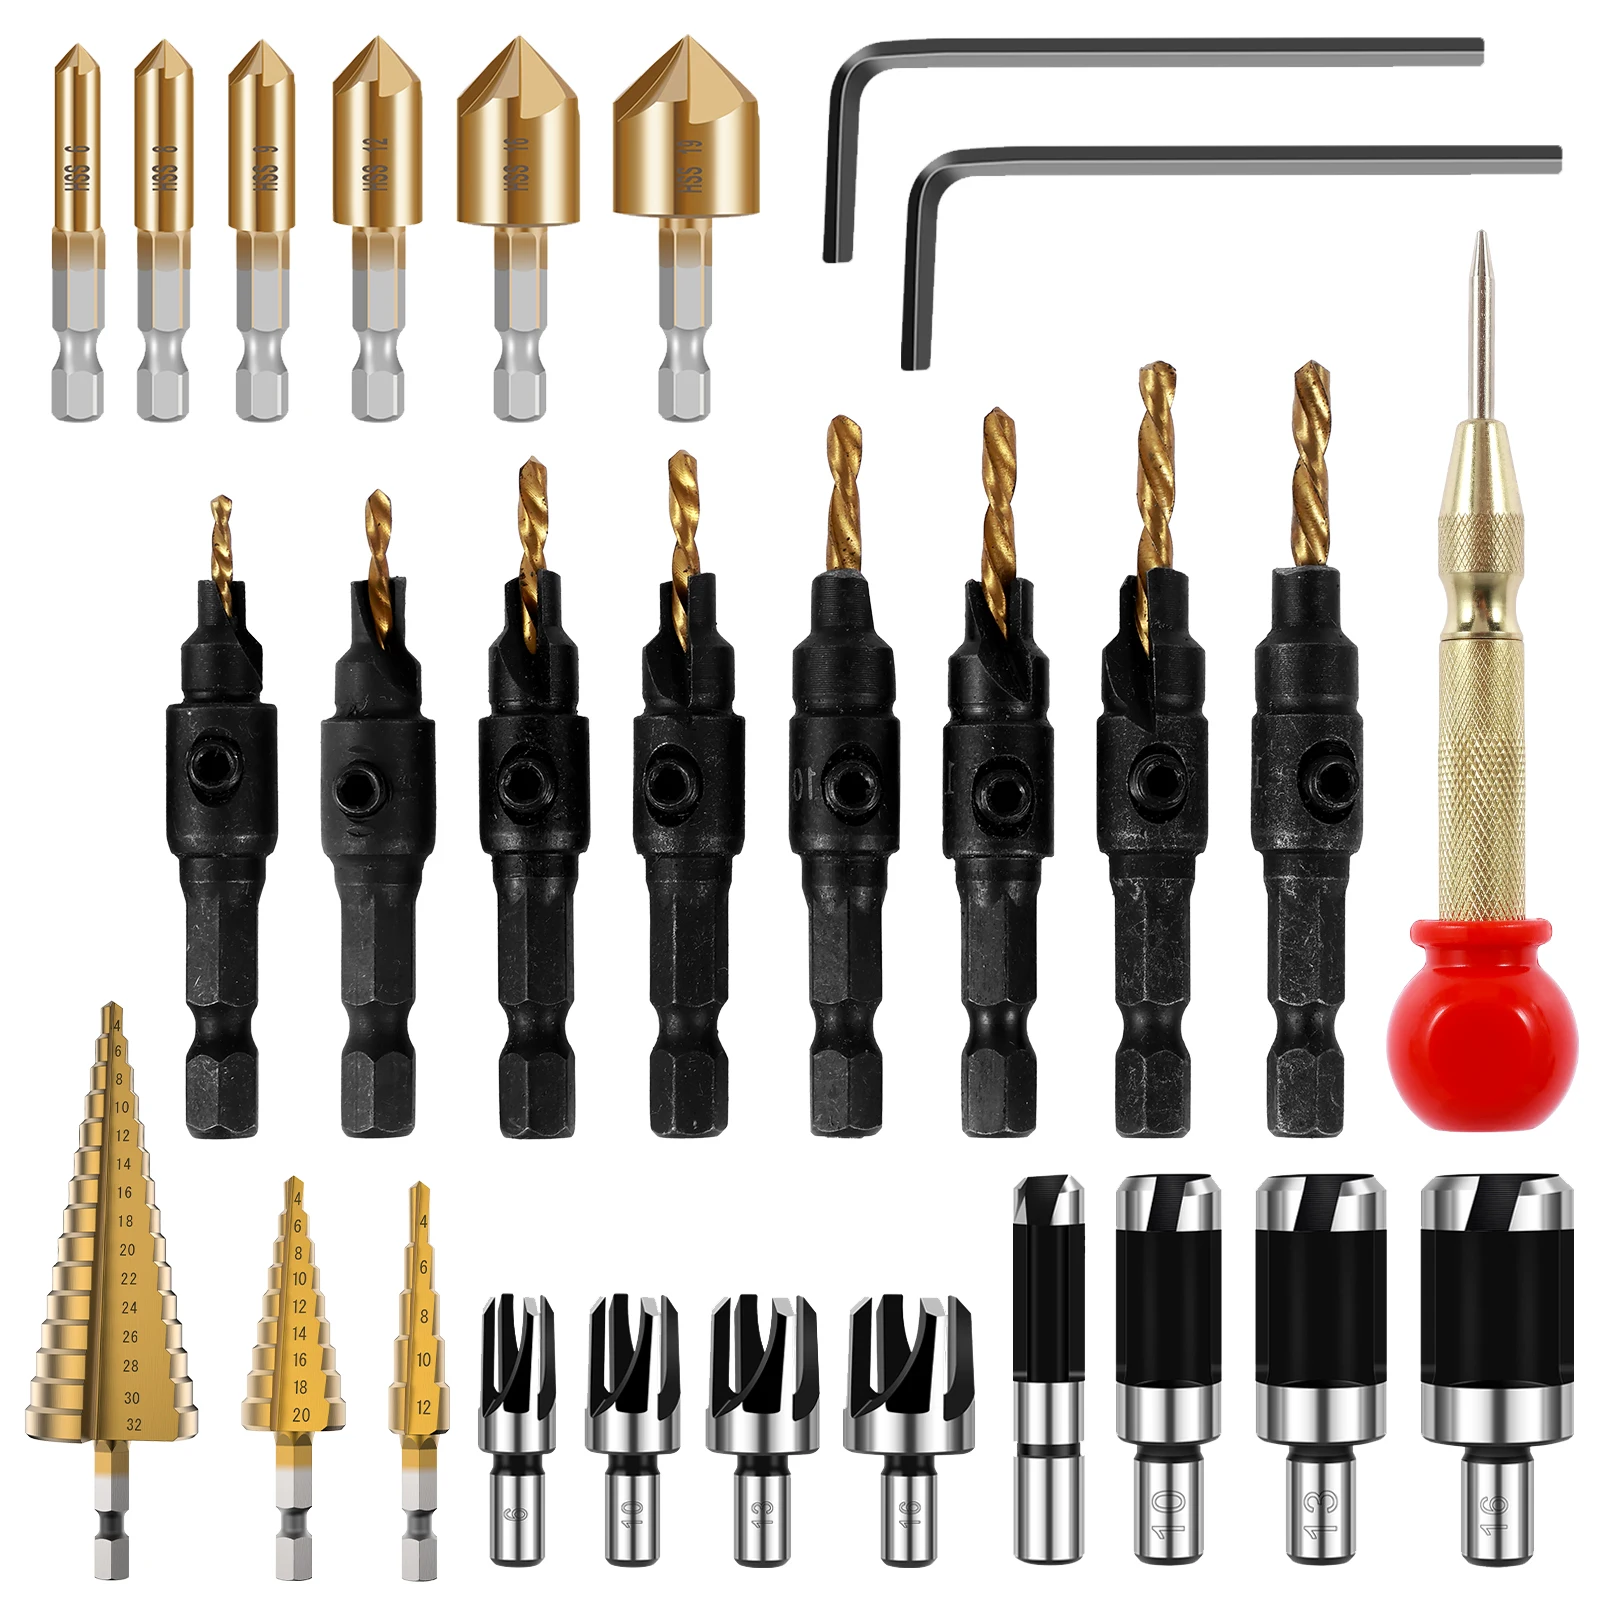 28PCS Woodworking Chamfer Drilling Tool with 8pcs Wood Plug Cutter Drill Bit 3pcs Step Drill Bit Countersink Drill Bit L-Wrench